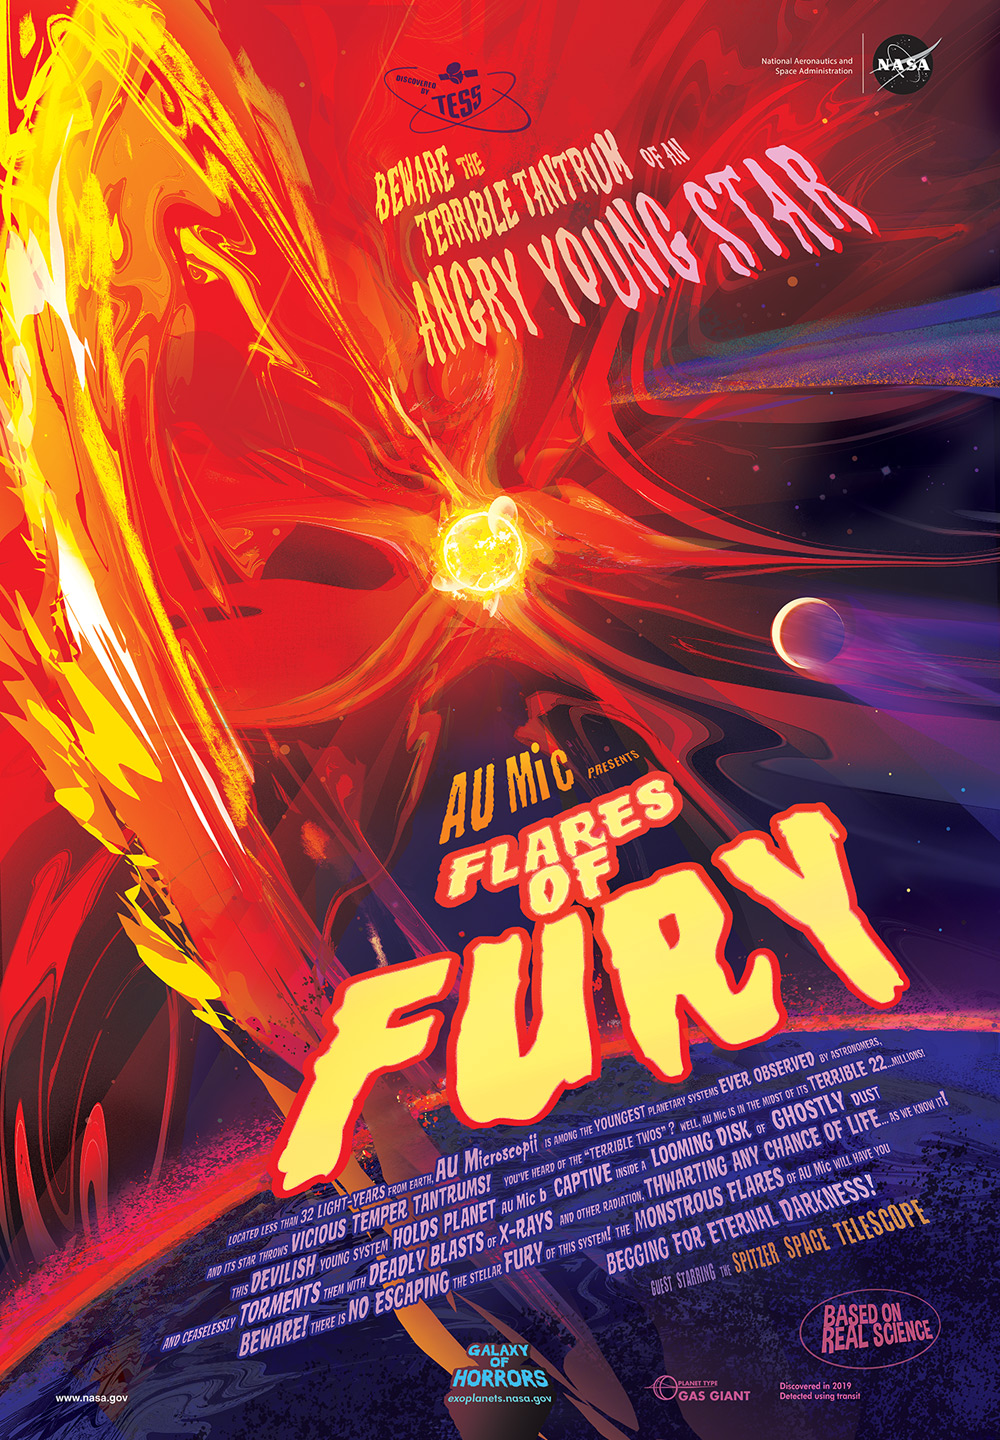 Flares of Fury – "Galaxy of Horrors" poster (English)